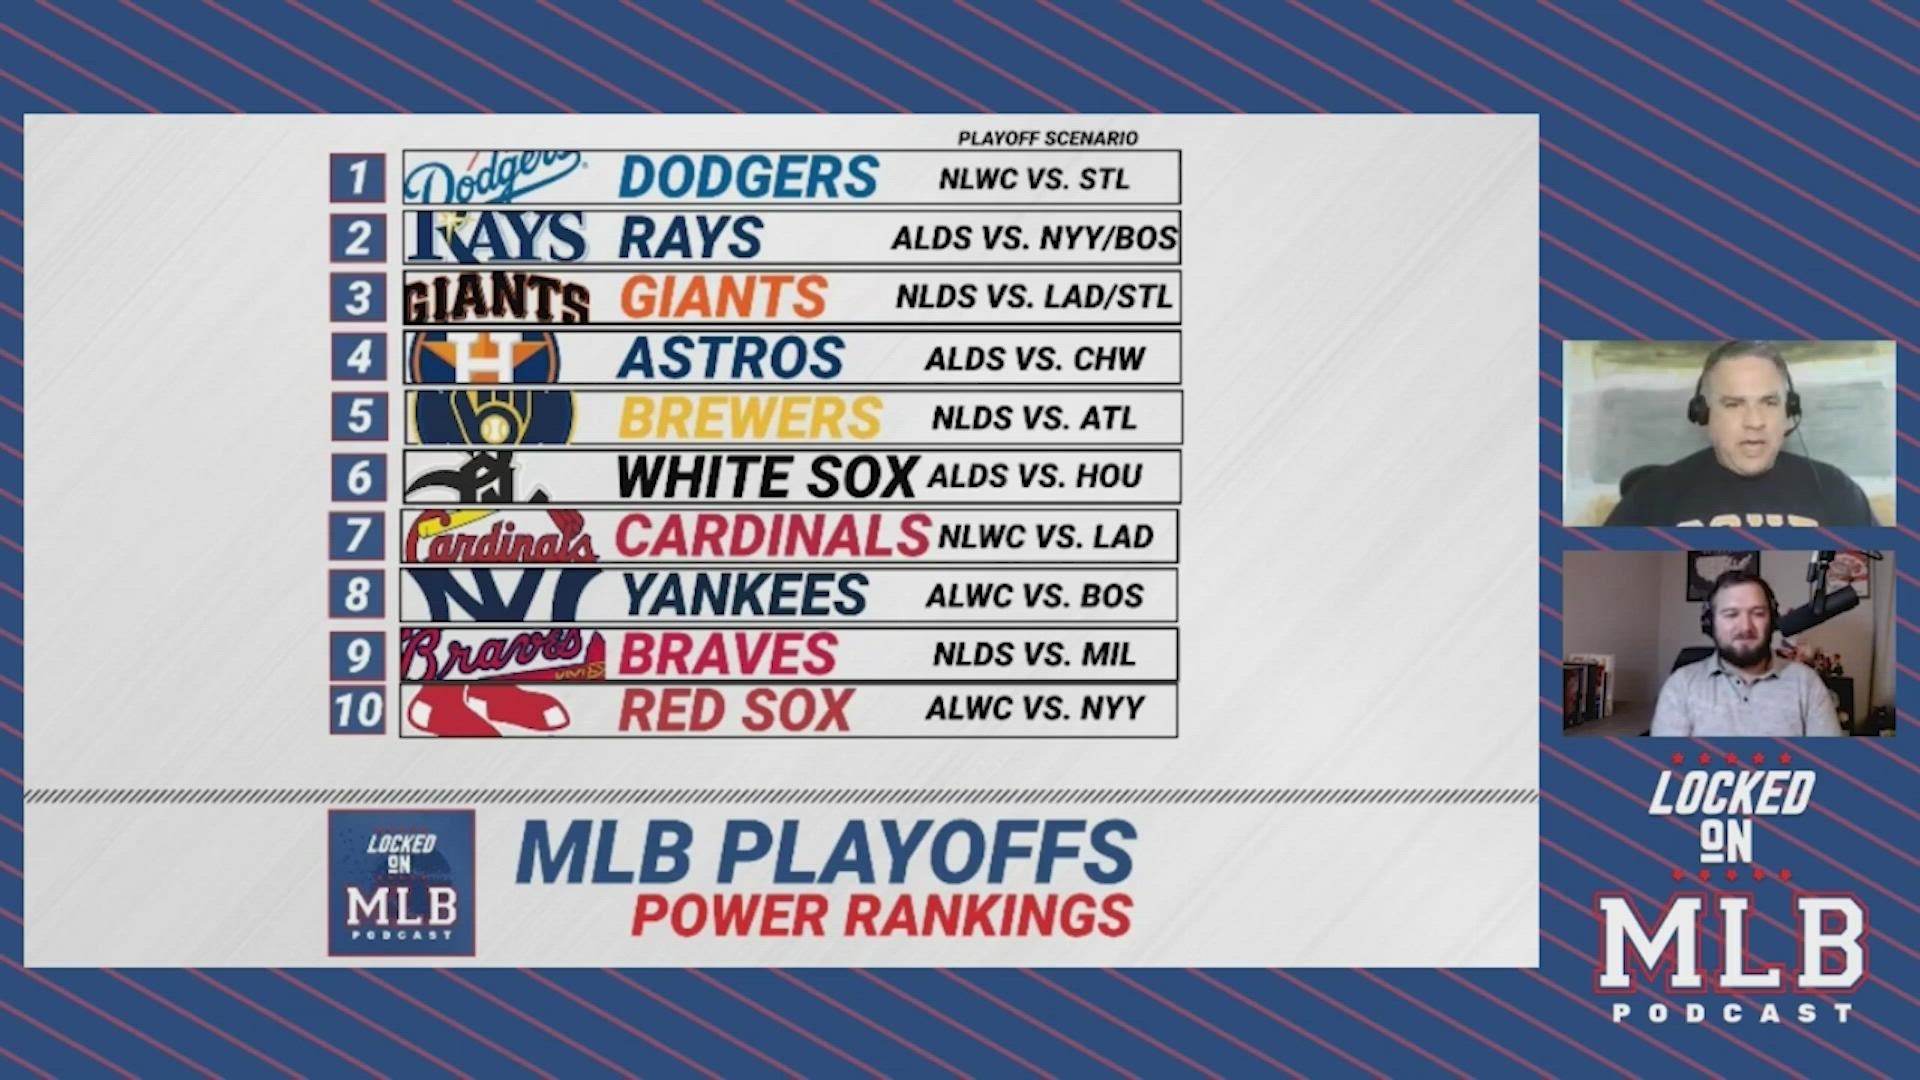 Head over to Locked On MLB on YouTube for our FULL playoff preview special where we go through all the power rankings and preview matchups.